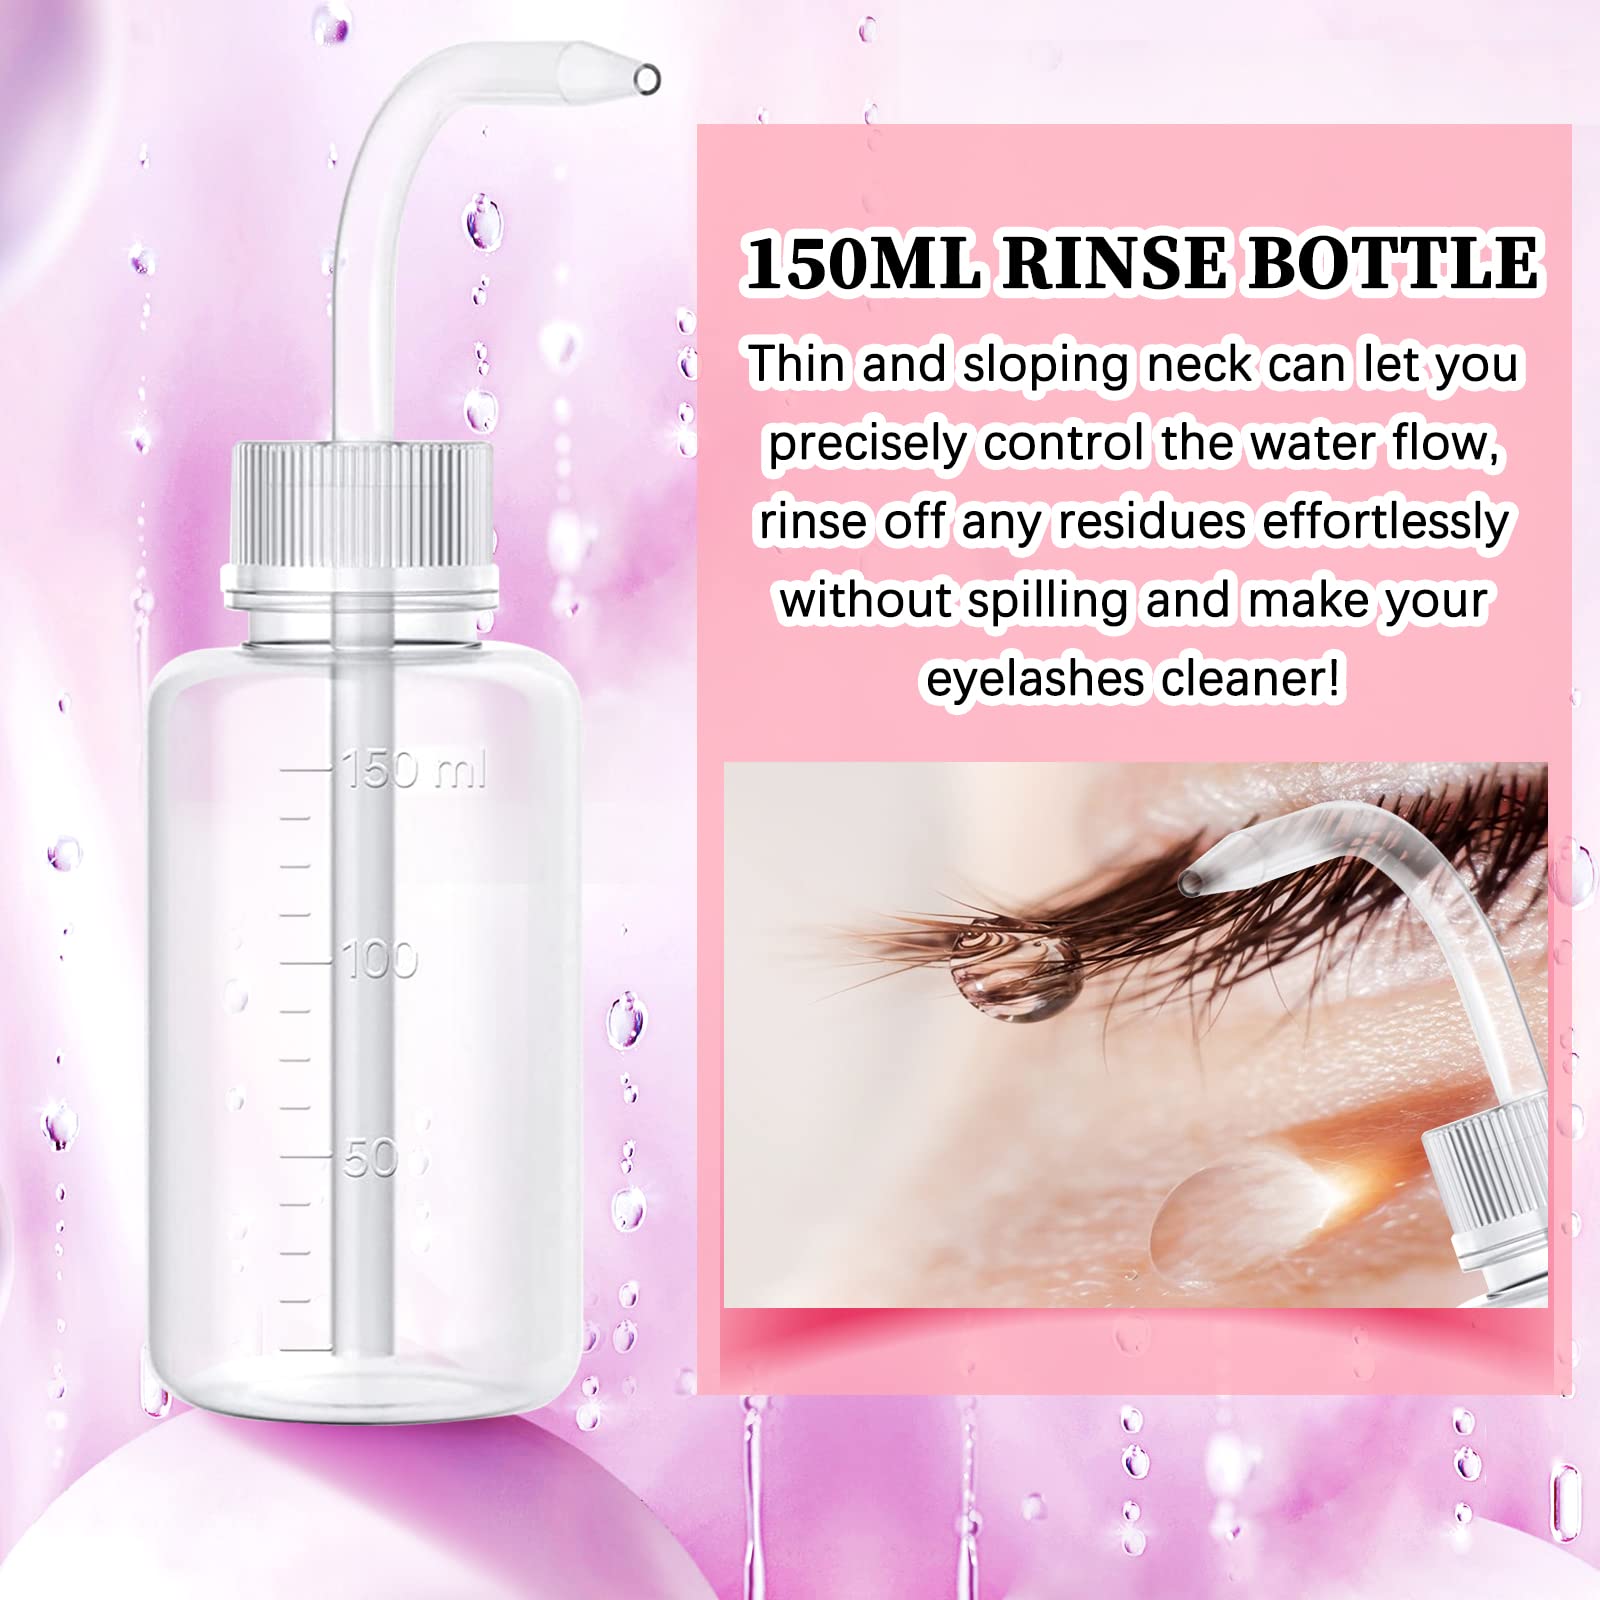 RTEWXLP Eyelash Extension Shampoo 50 ml+Rinse Bottle+Brushes+Hydrogel Eye Patch - Eyelid Foaming Cleanser,Paraben & Sulfate Free,Natural Lashes Makeup & Mascara Remover For Salon and Home Use